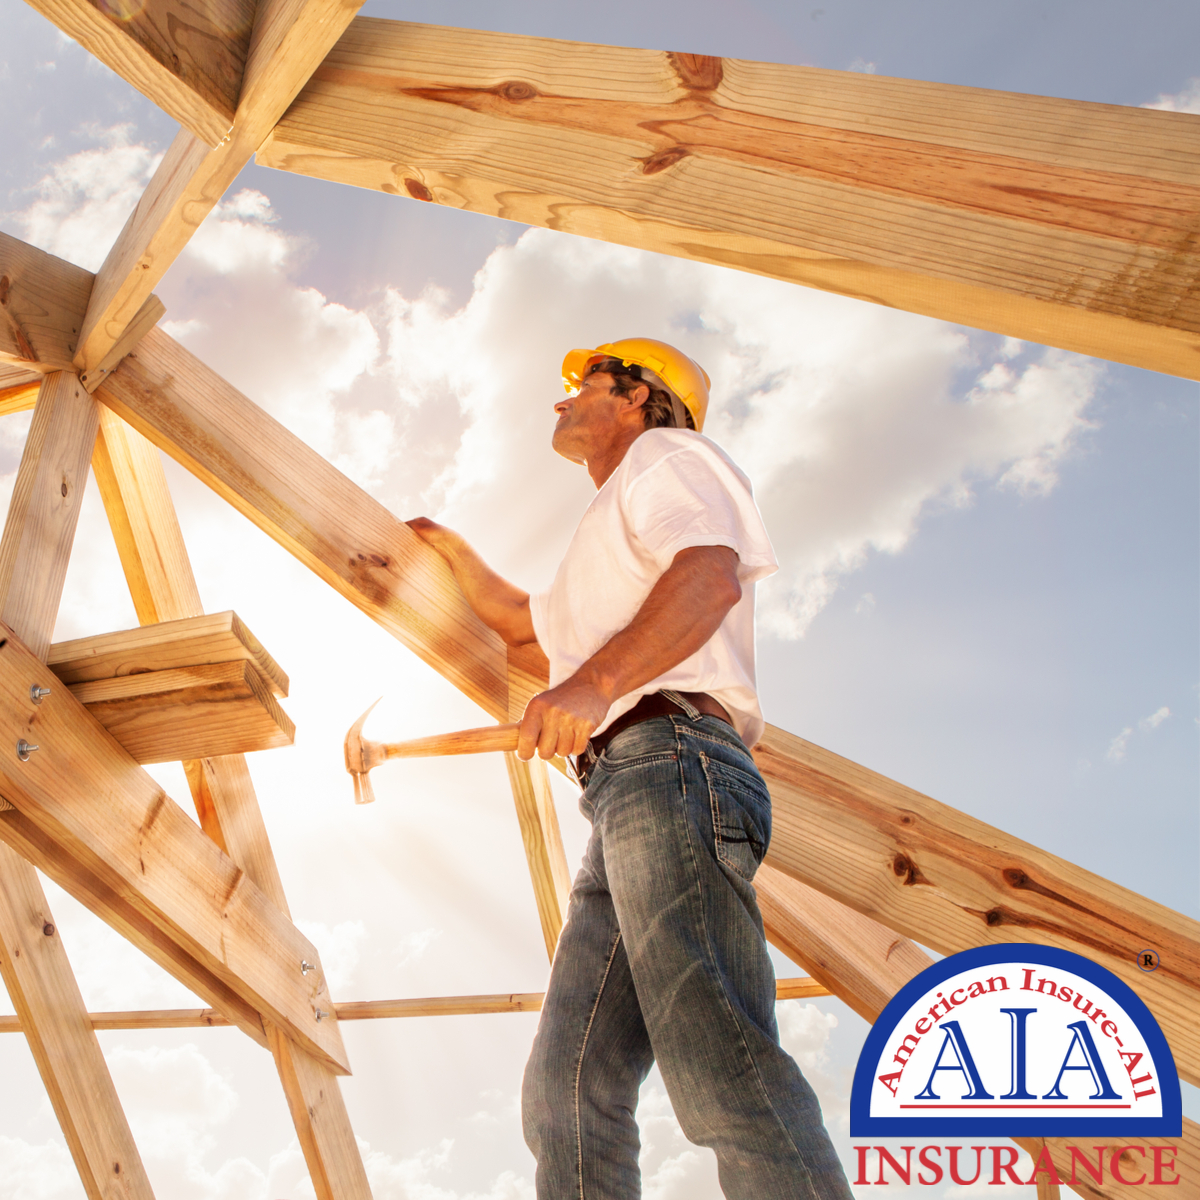 Managing a New Home Build? Check Out Home Builders Insurance with American Insure-All®!